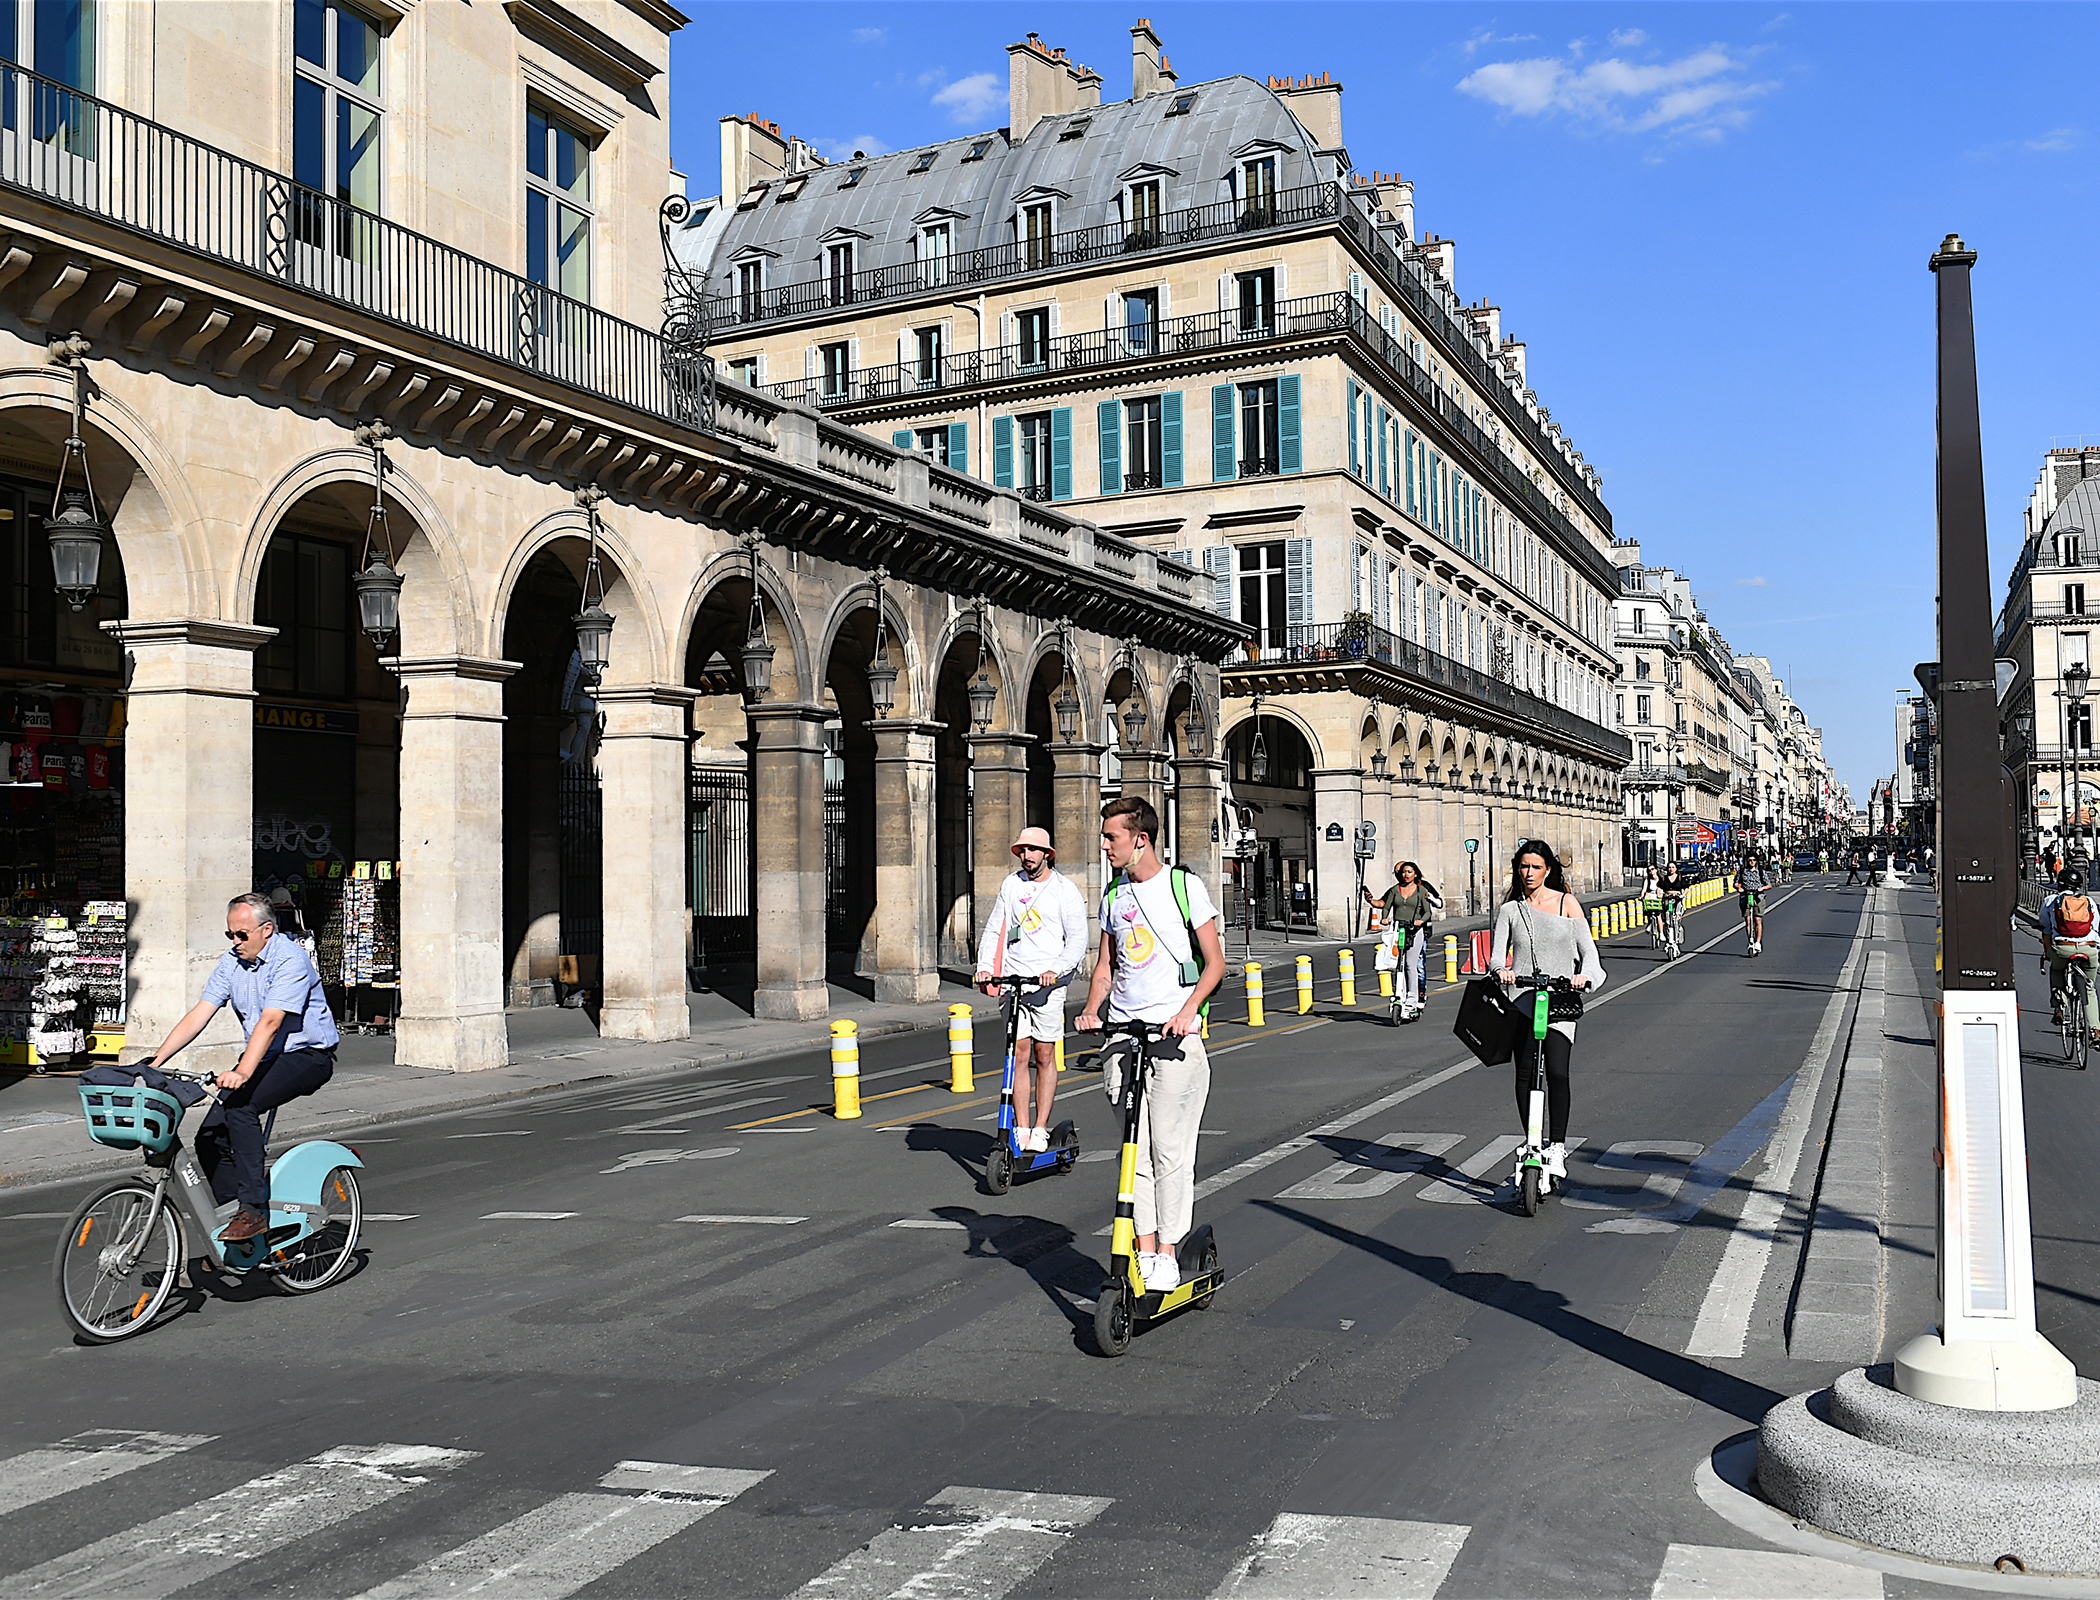 Rented electric scooters removed from Paris as ban enters into force